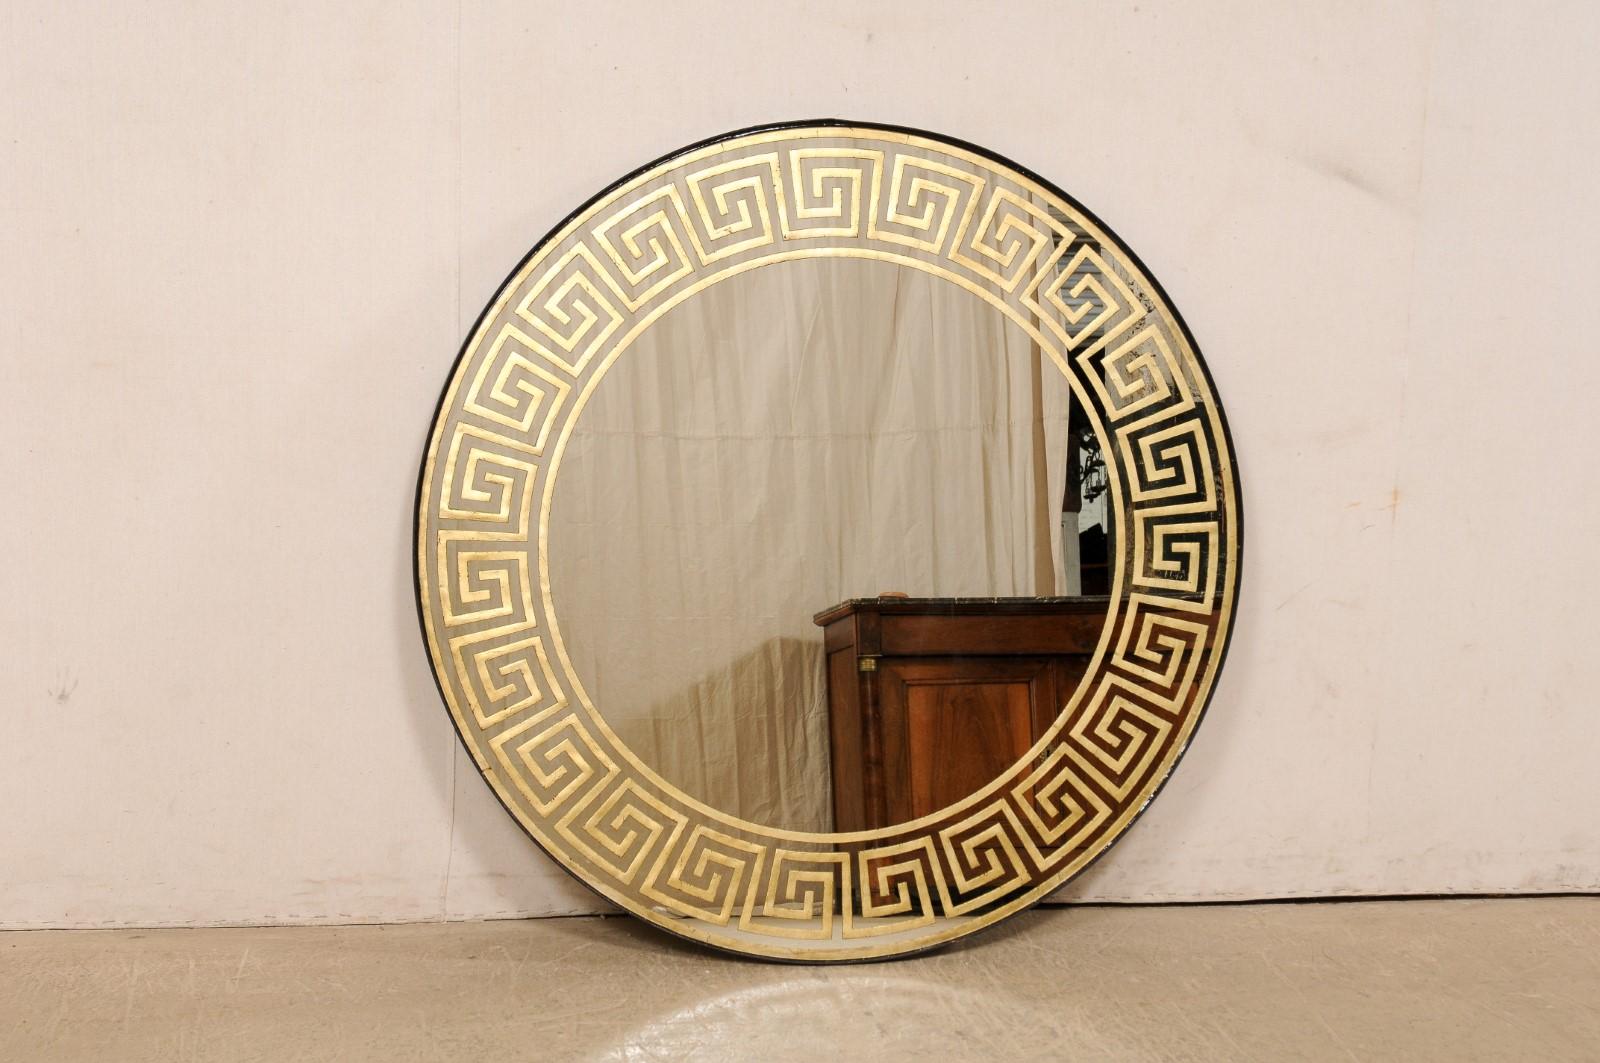 An artisan crafted round mirror with gold églomisé Greek key motif. This nicely sized and round-shaped mirror, with a diameter of approximately 4 feet, has been artisan-crafted with a gold tone églomisé Greek key decorative perimeter banding, and a